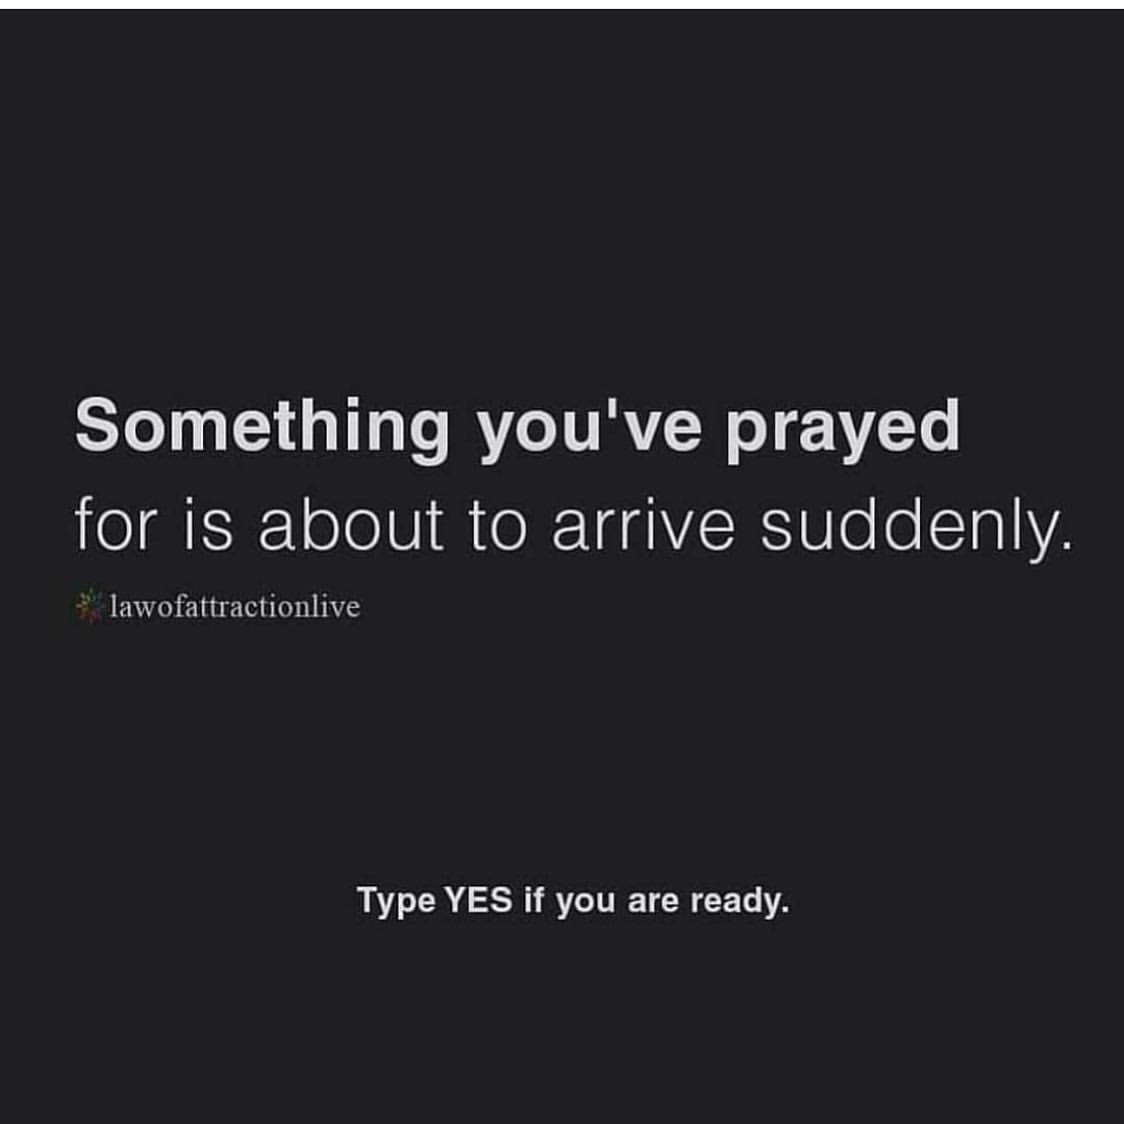 Something you've prayed for is about to arrive suddenly.